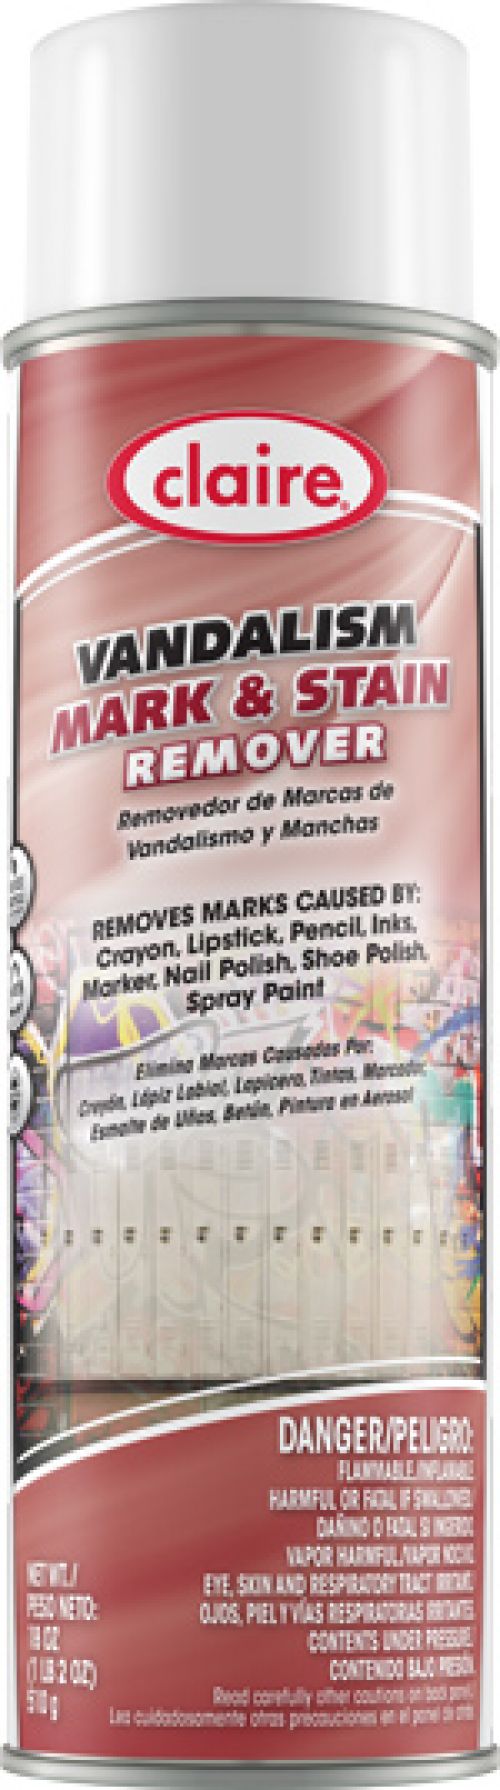 Vandalism Mark & Stain Remover